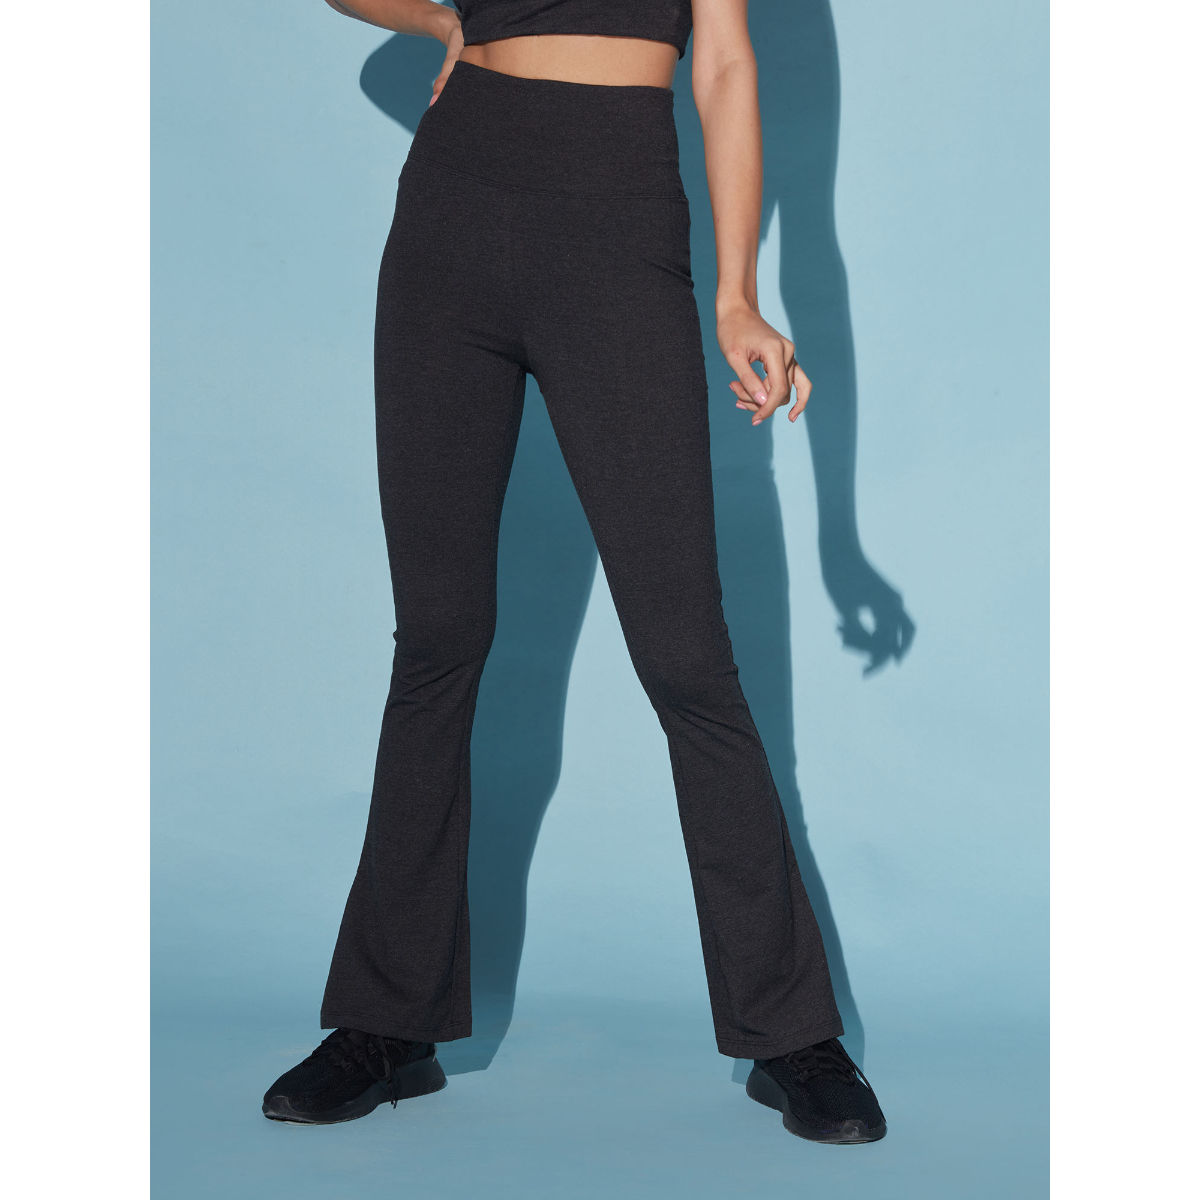 HighRise Cotton Flare Pants with 4 Pockets  BlissClub